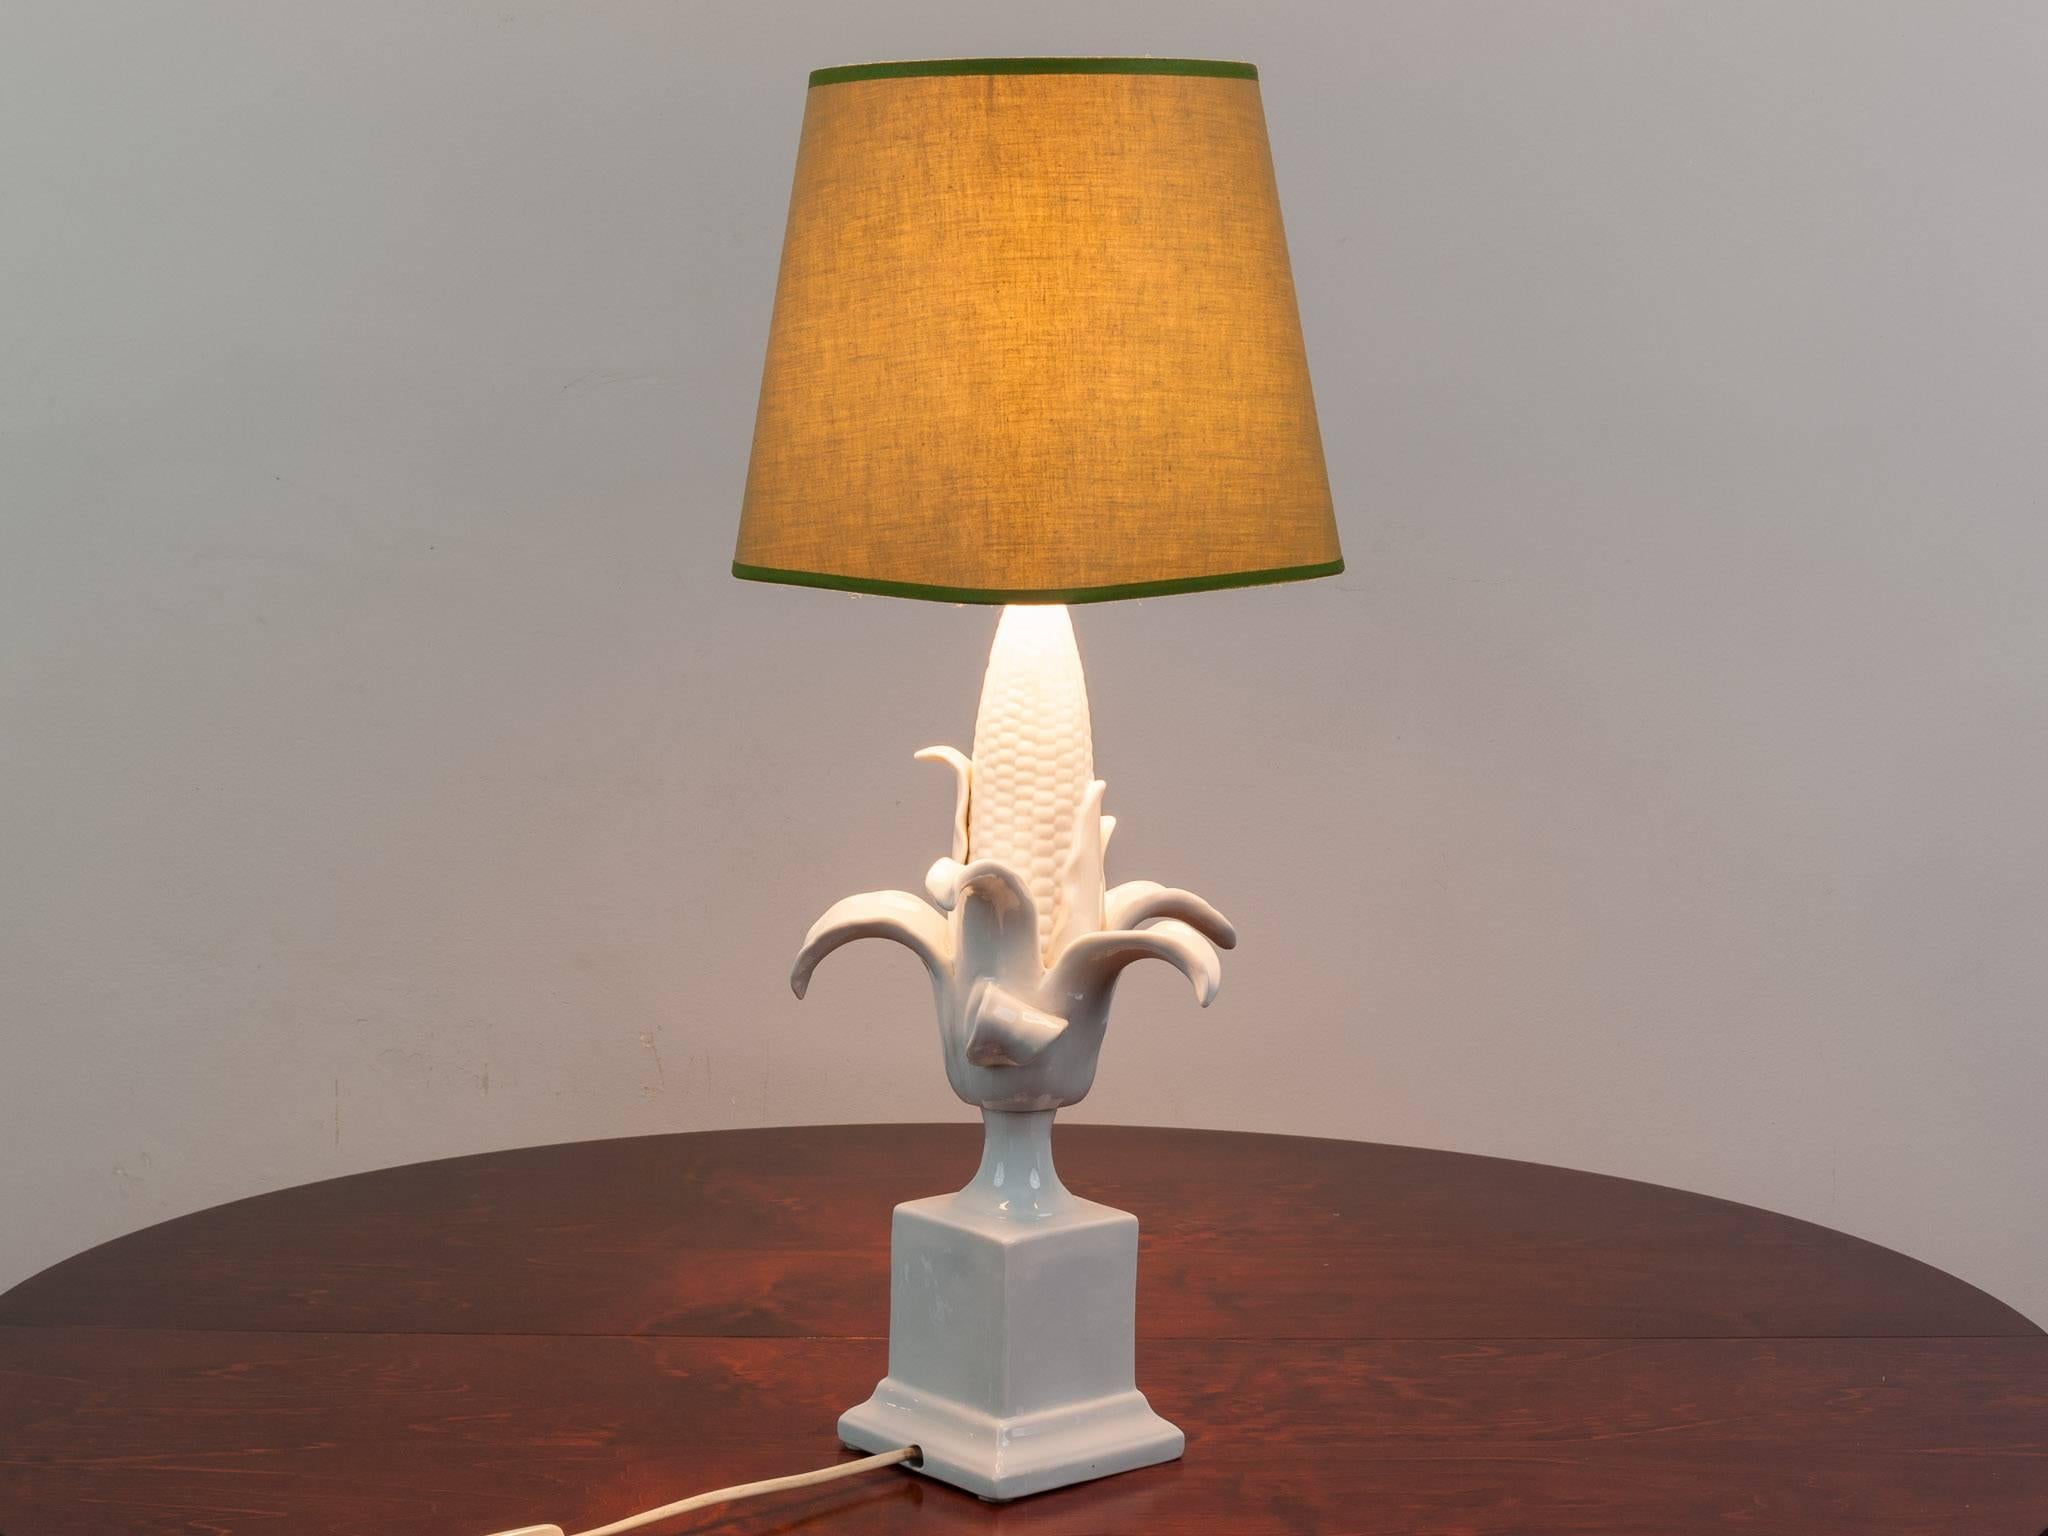 An unusual and quirky 1970s white glazed porcelain table lamp in the shape of a corn on the cob including its original pale green shade. Unknown designer. PAT tested to UK standards.

Measures: 46cms to the fitting. 63cms to the top of the shade.